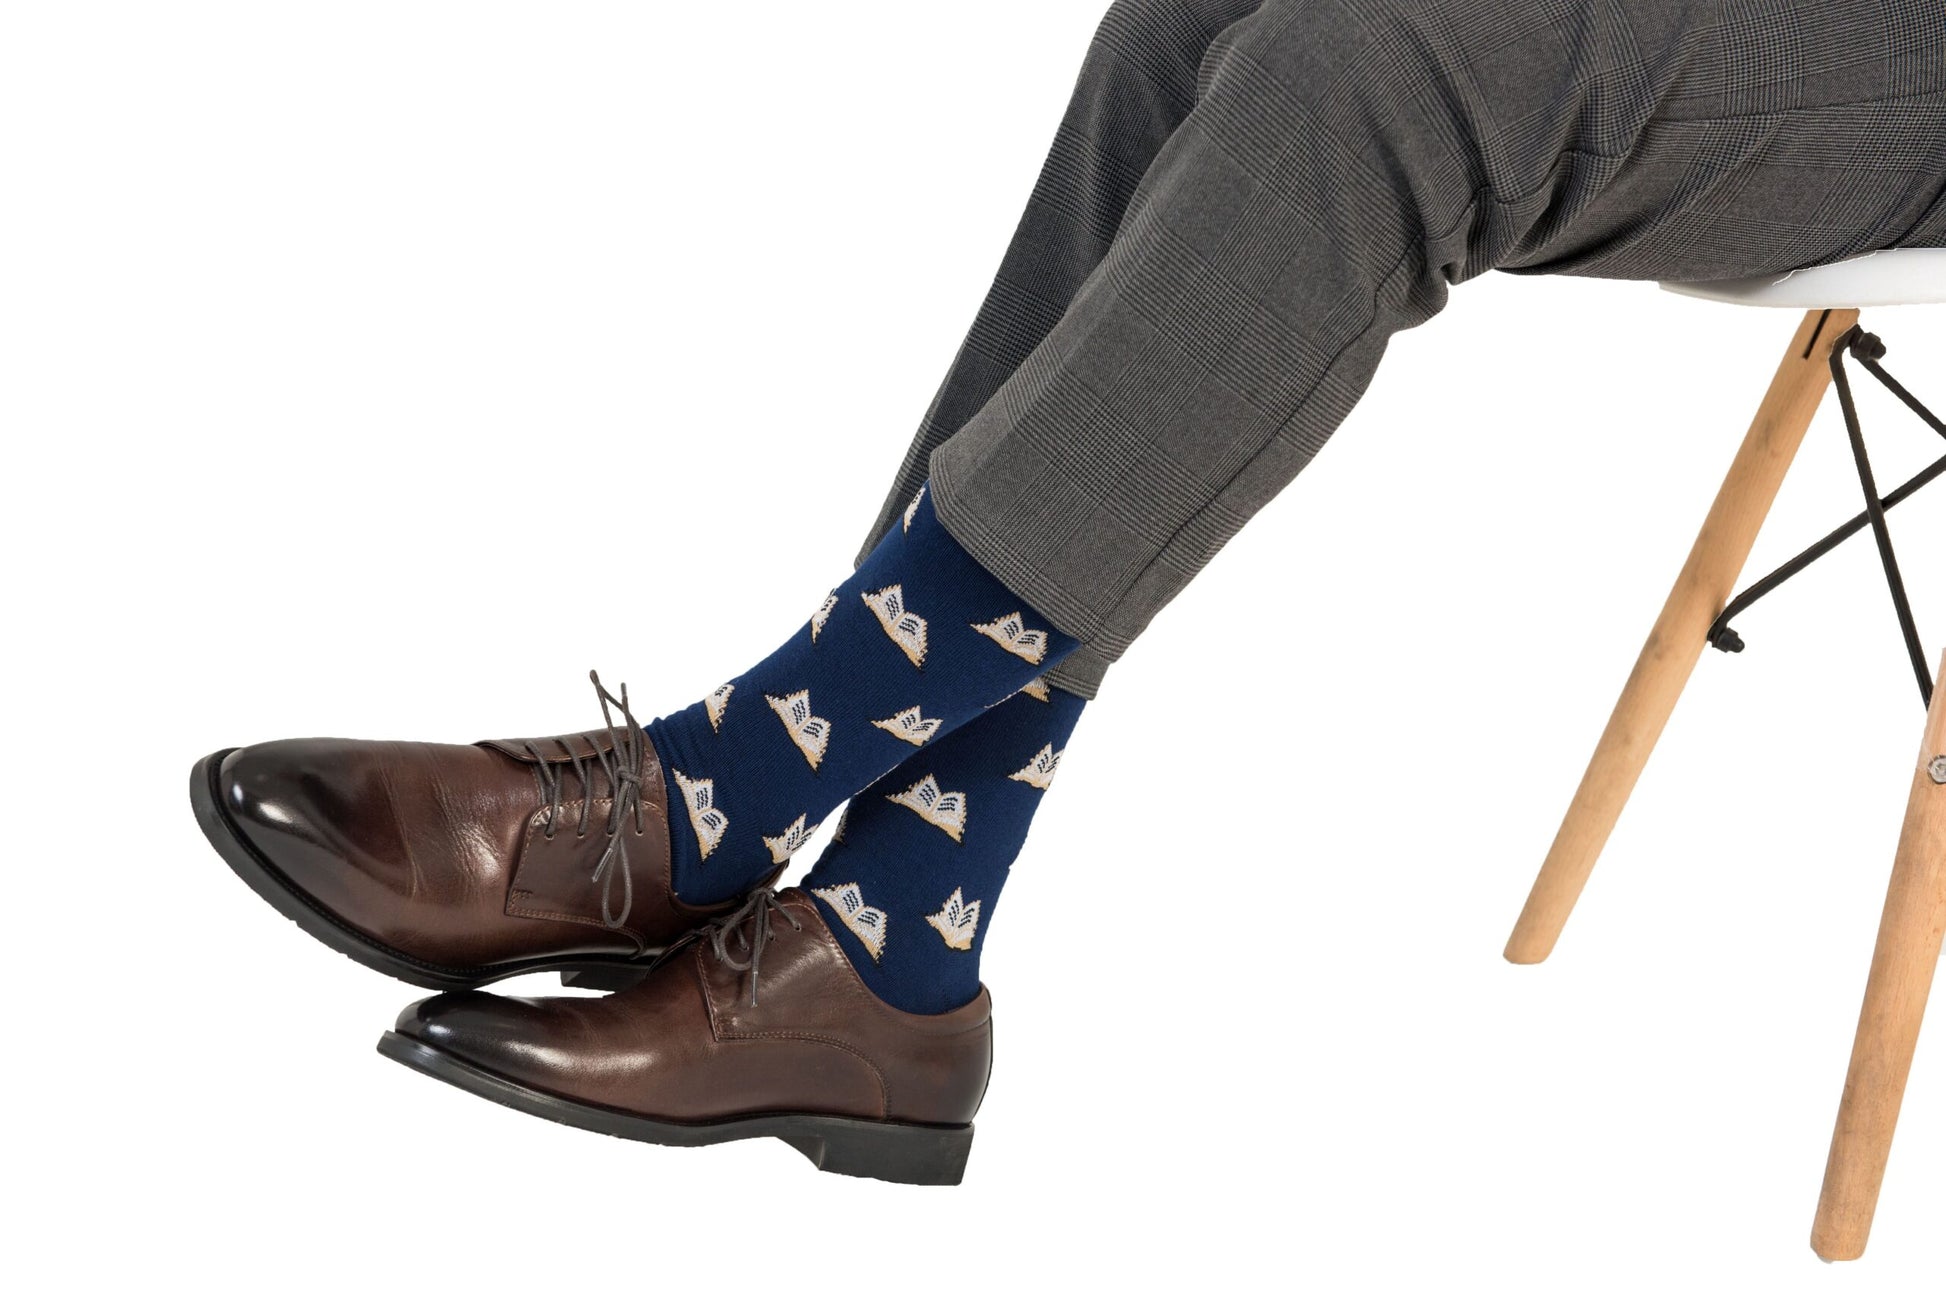 A man sitting on a chair wearing a pair of Book Socks.